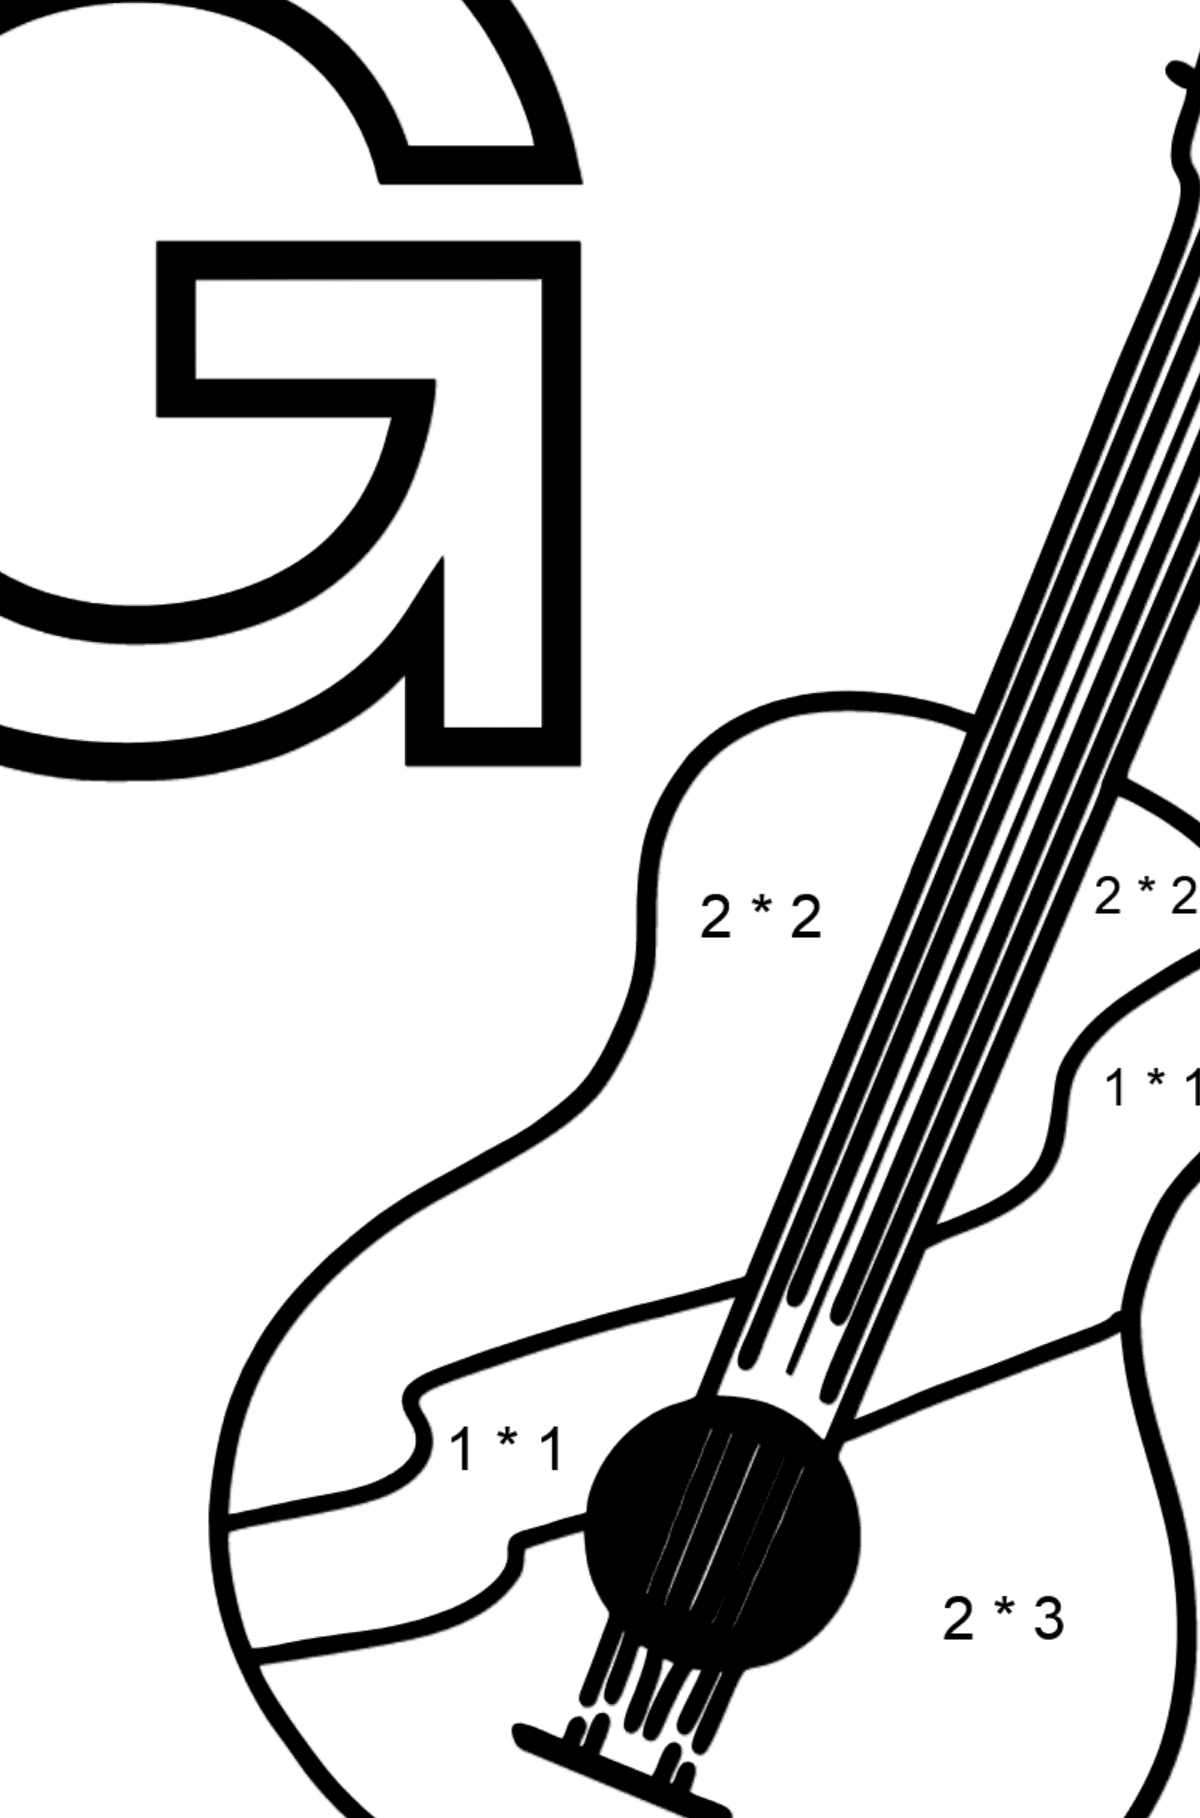 Spanish Letter G coloring pages - GUITARRA - Math Coloring - Multiplication for Kids